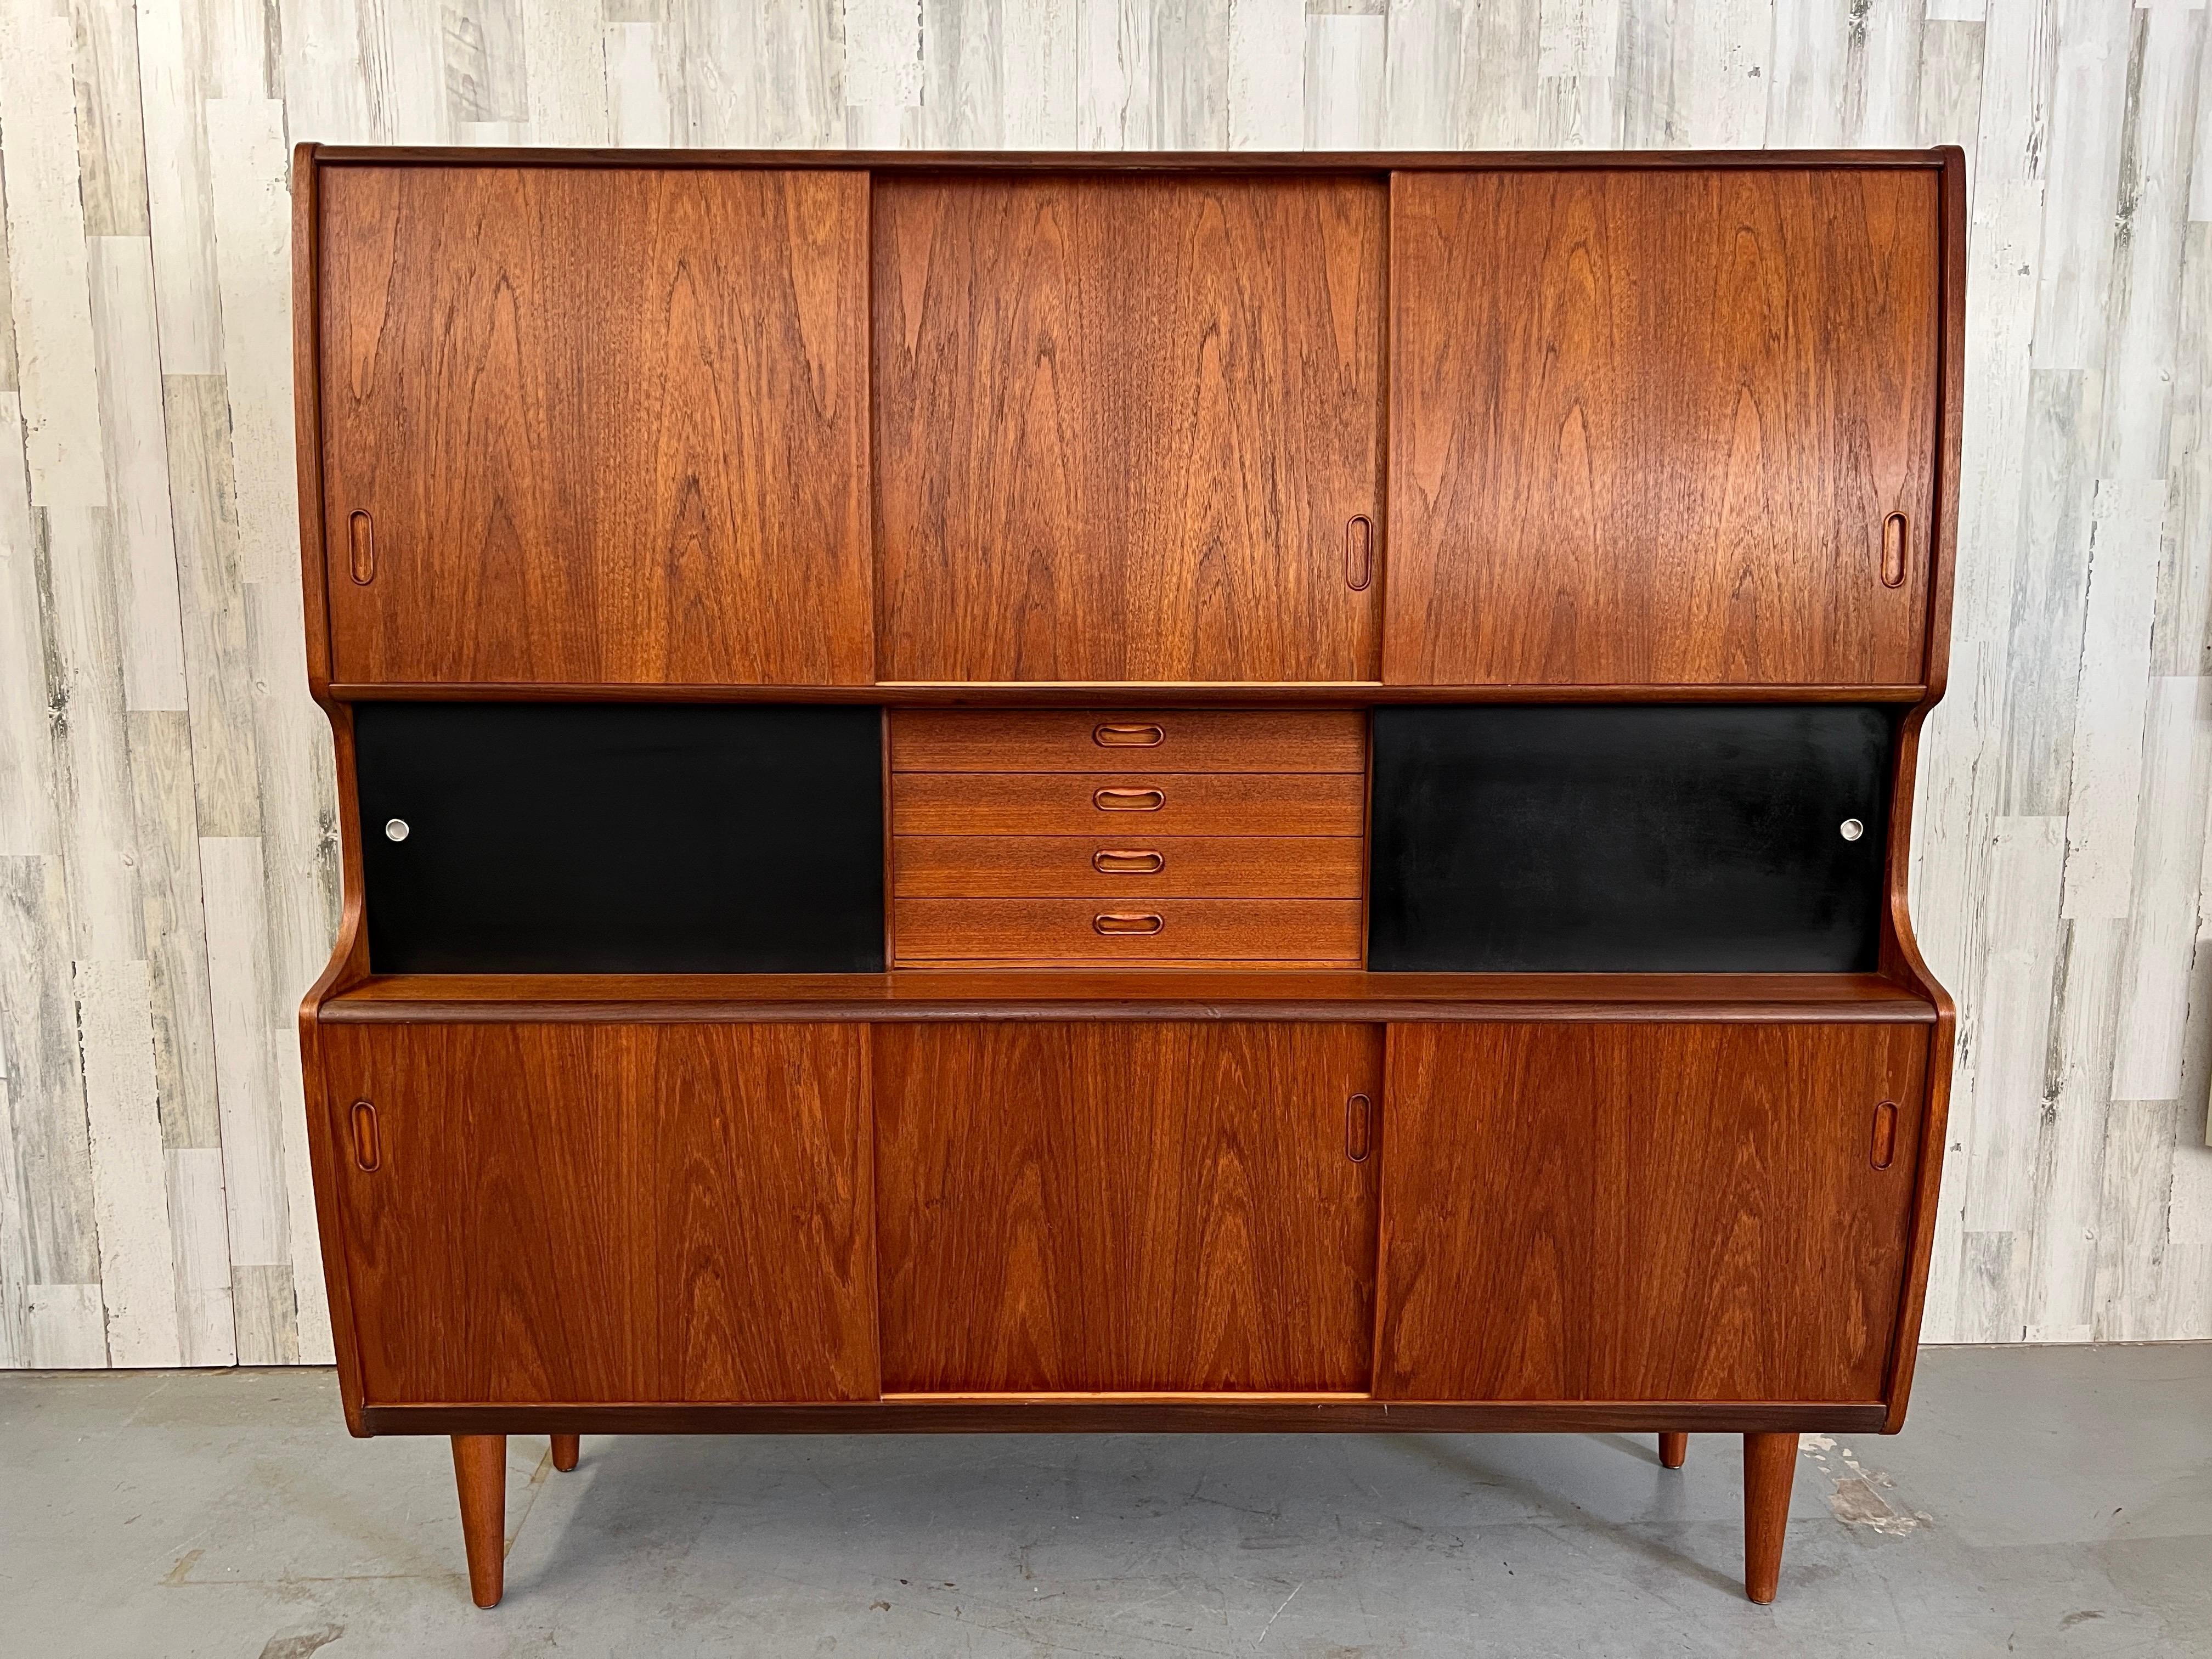 Sculpted teak highboard / credenza with mirrored center cabinet and masonite sliding doors.
Lots of storage or use as a bar.